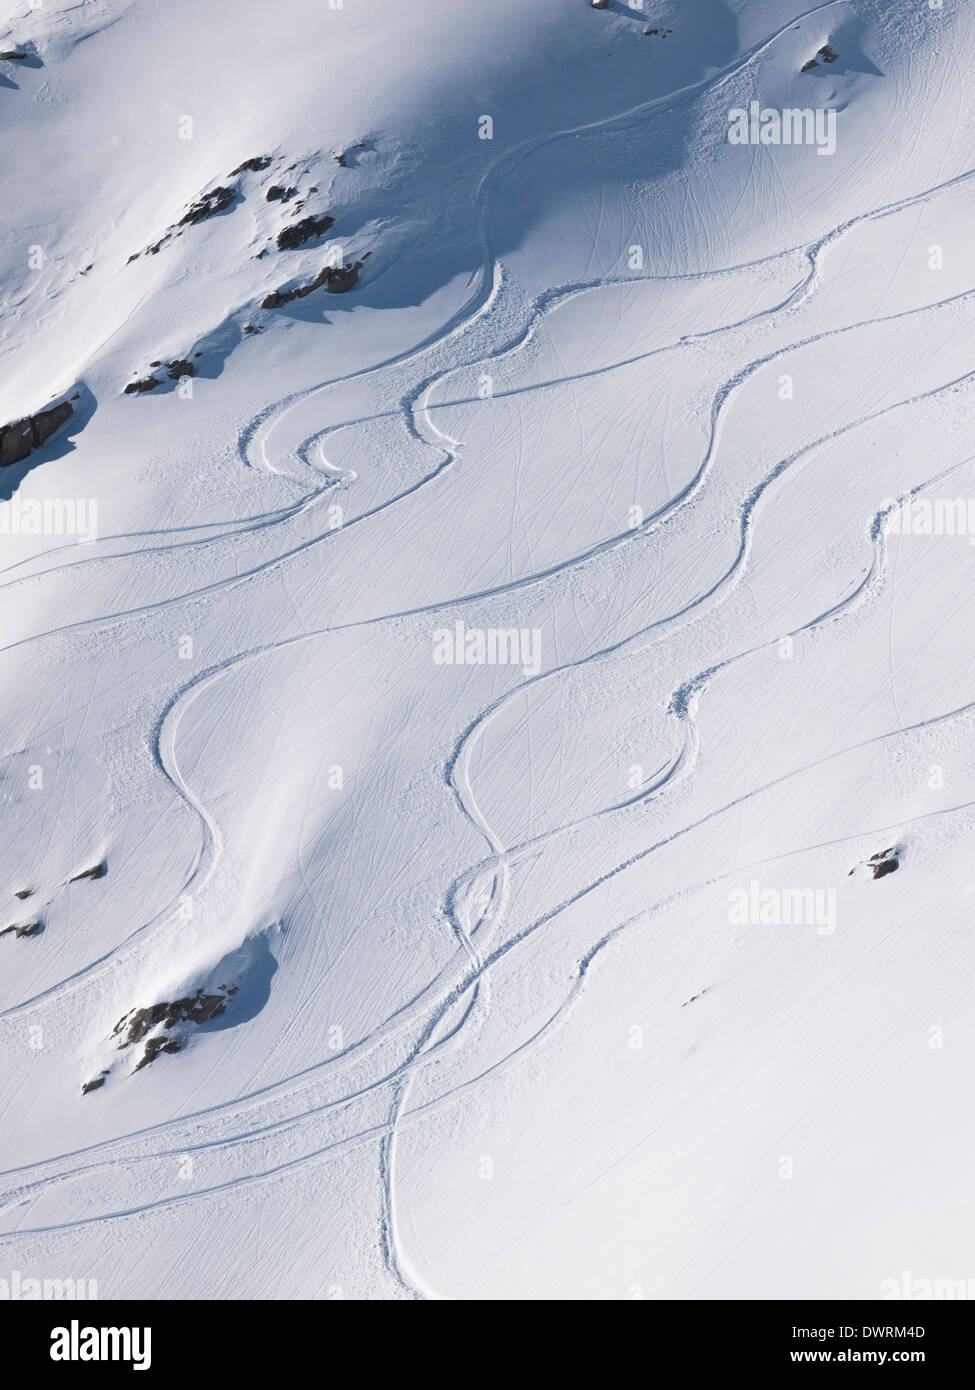 backcountry skiier trails on an untouched piste Stock Photo